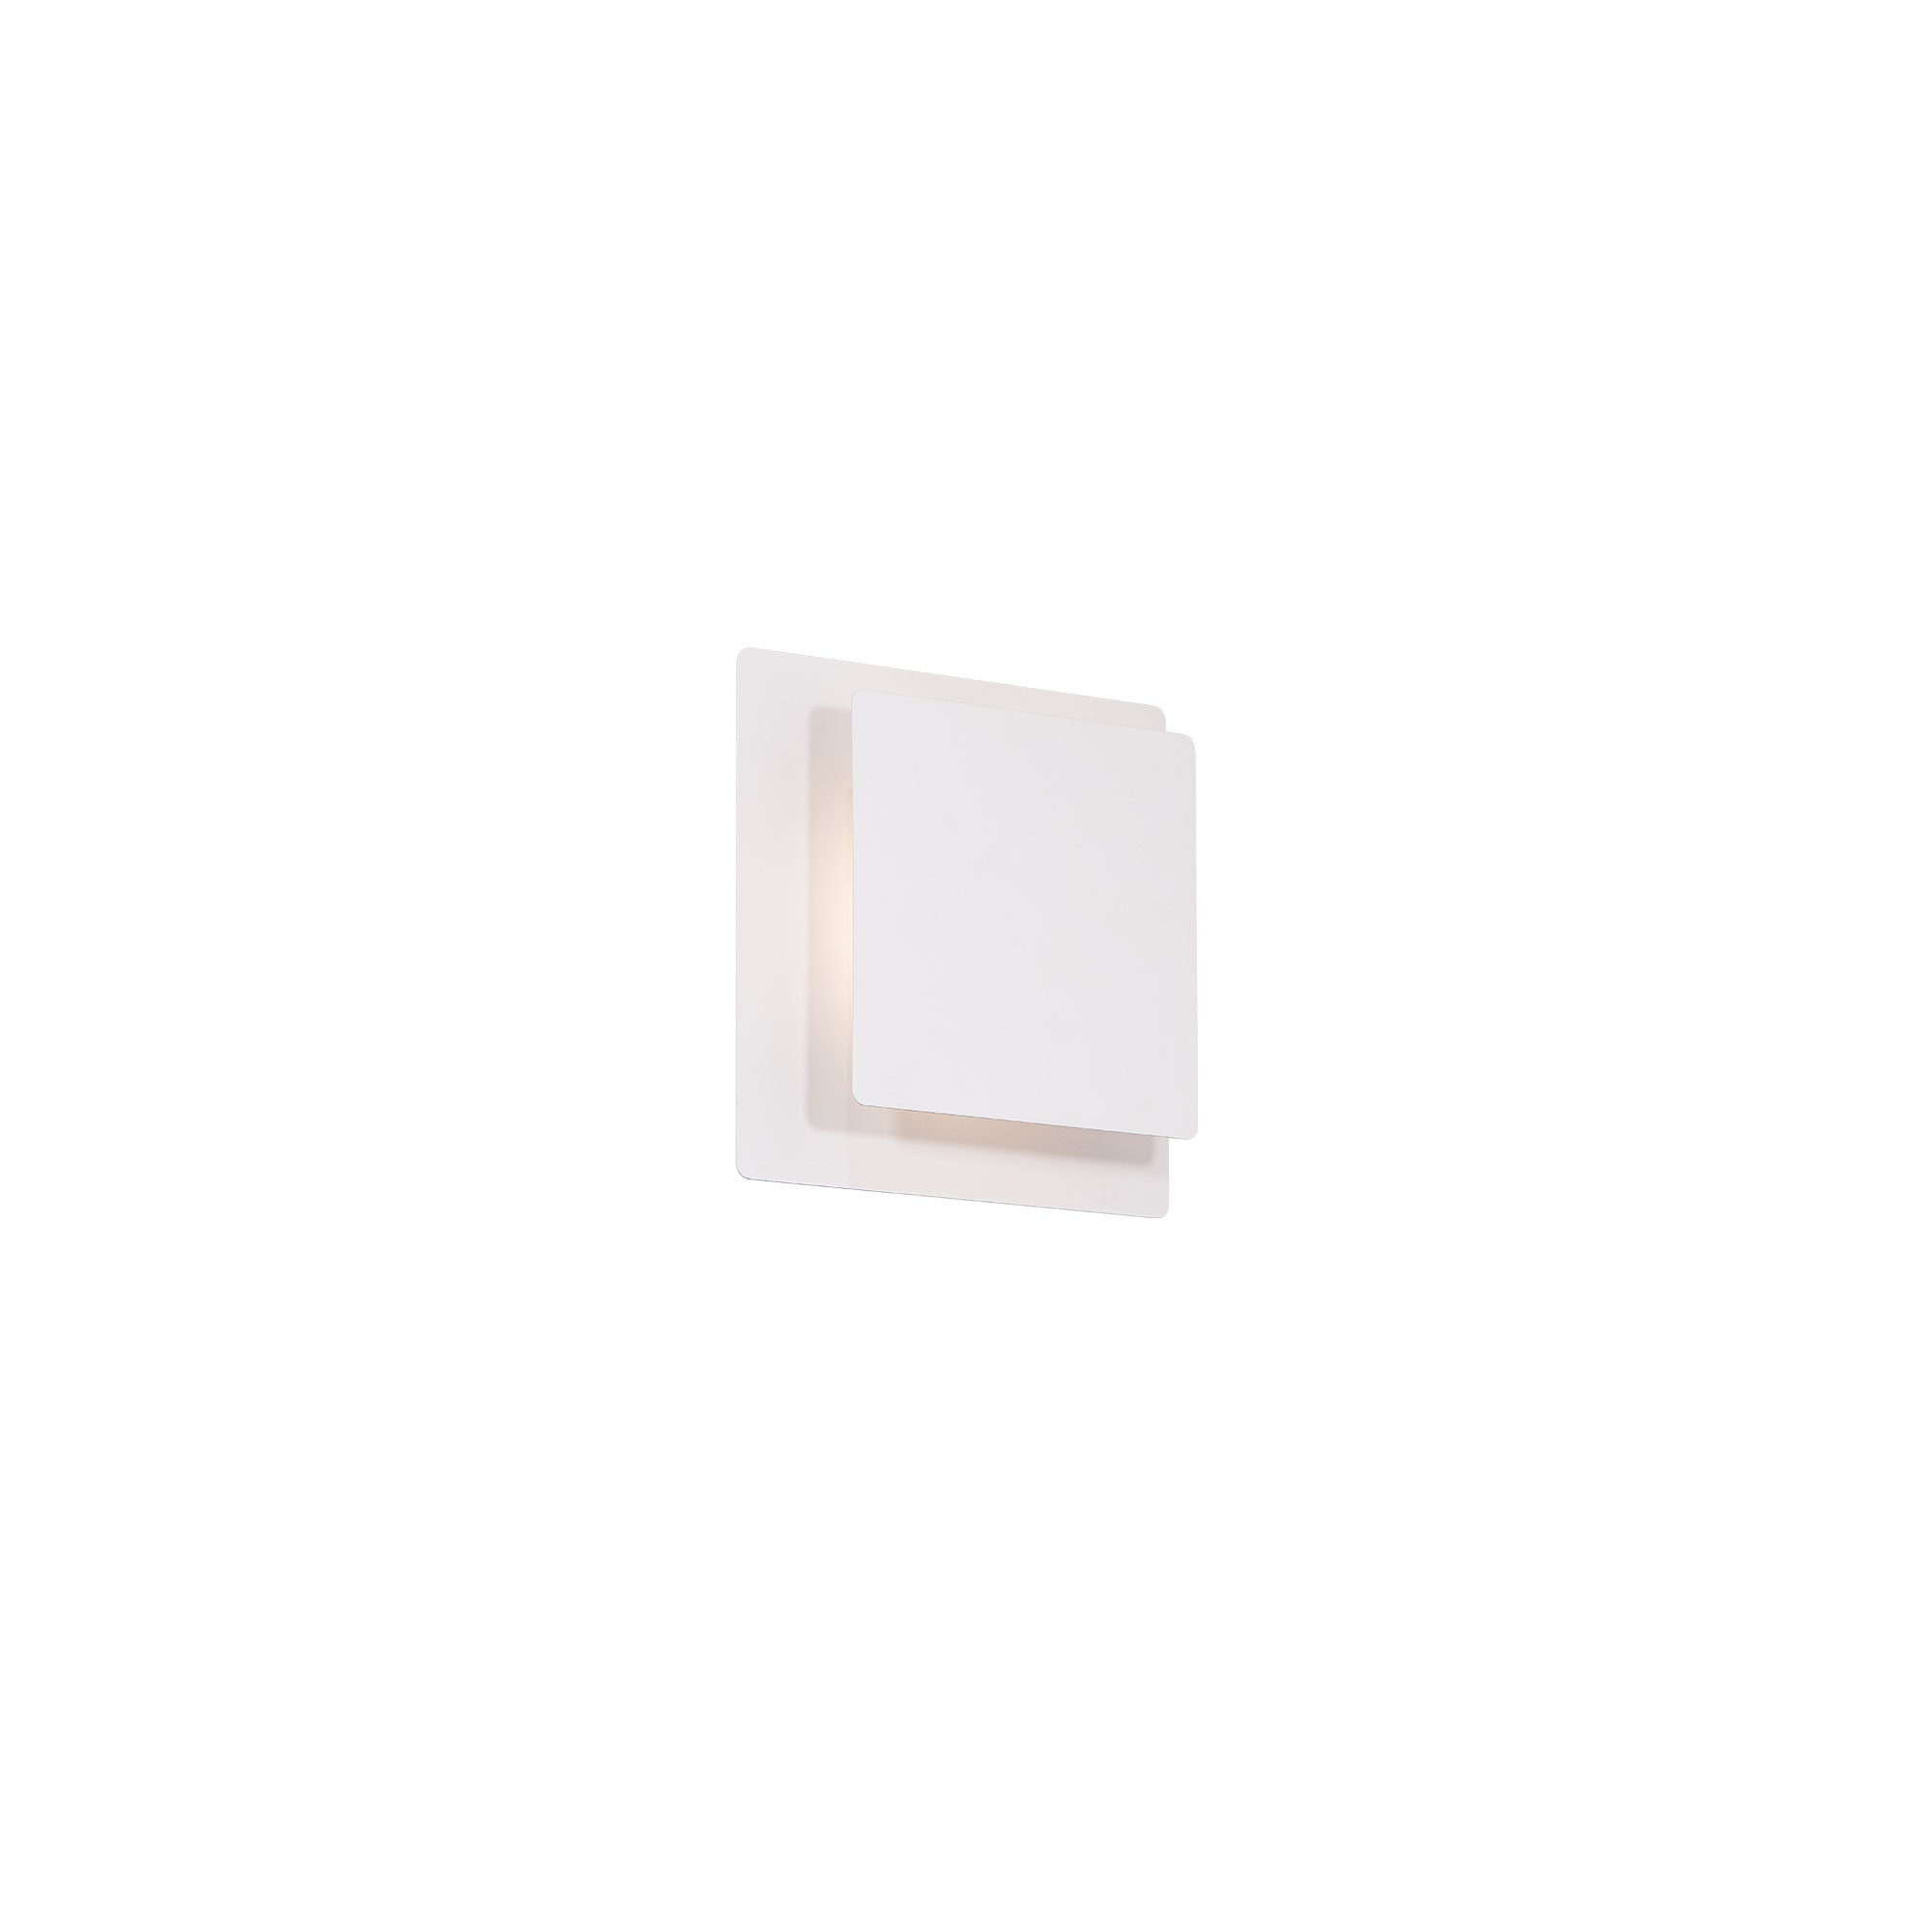 W.A.C. Canada - WS-87407-27-WT - LED Wall Sconce - Greet - White